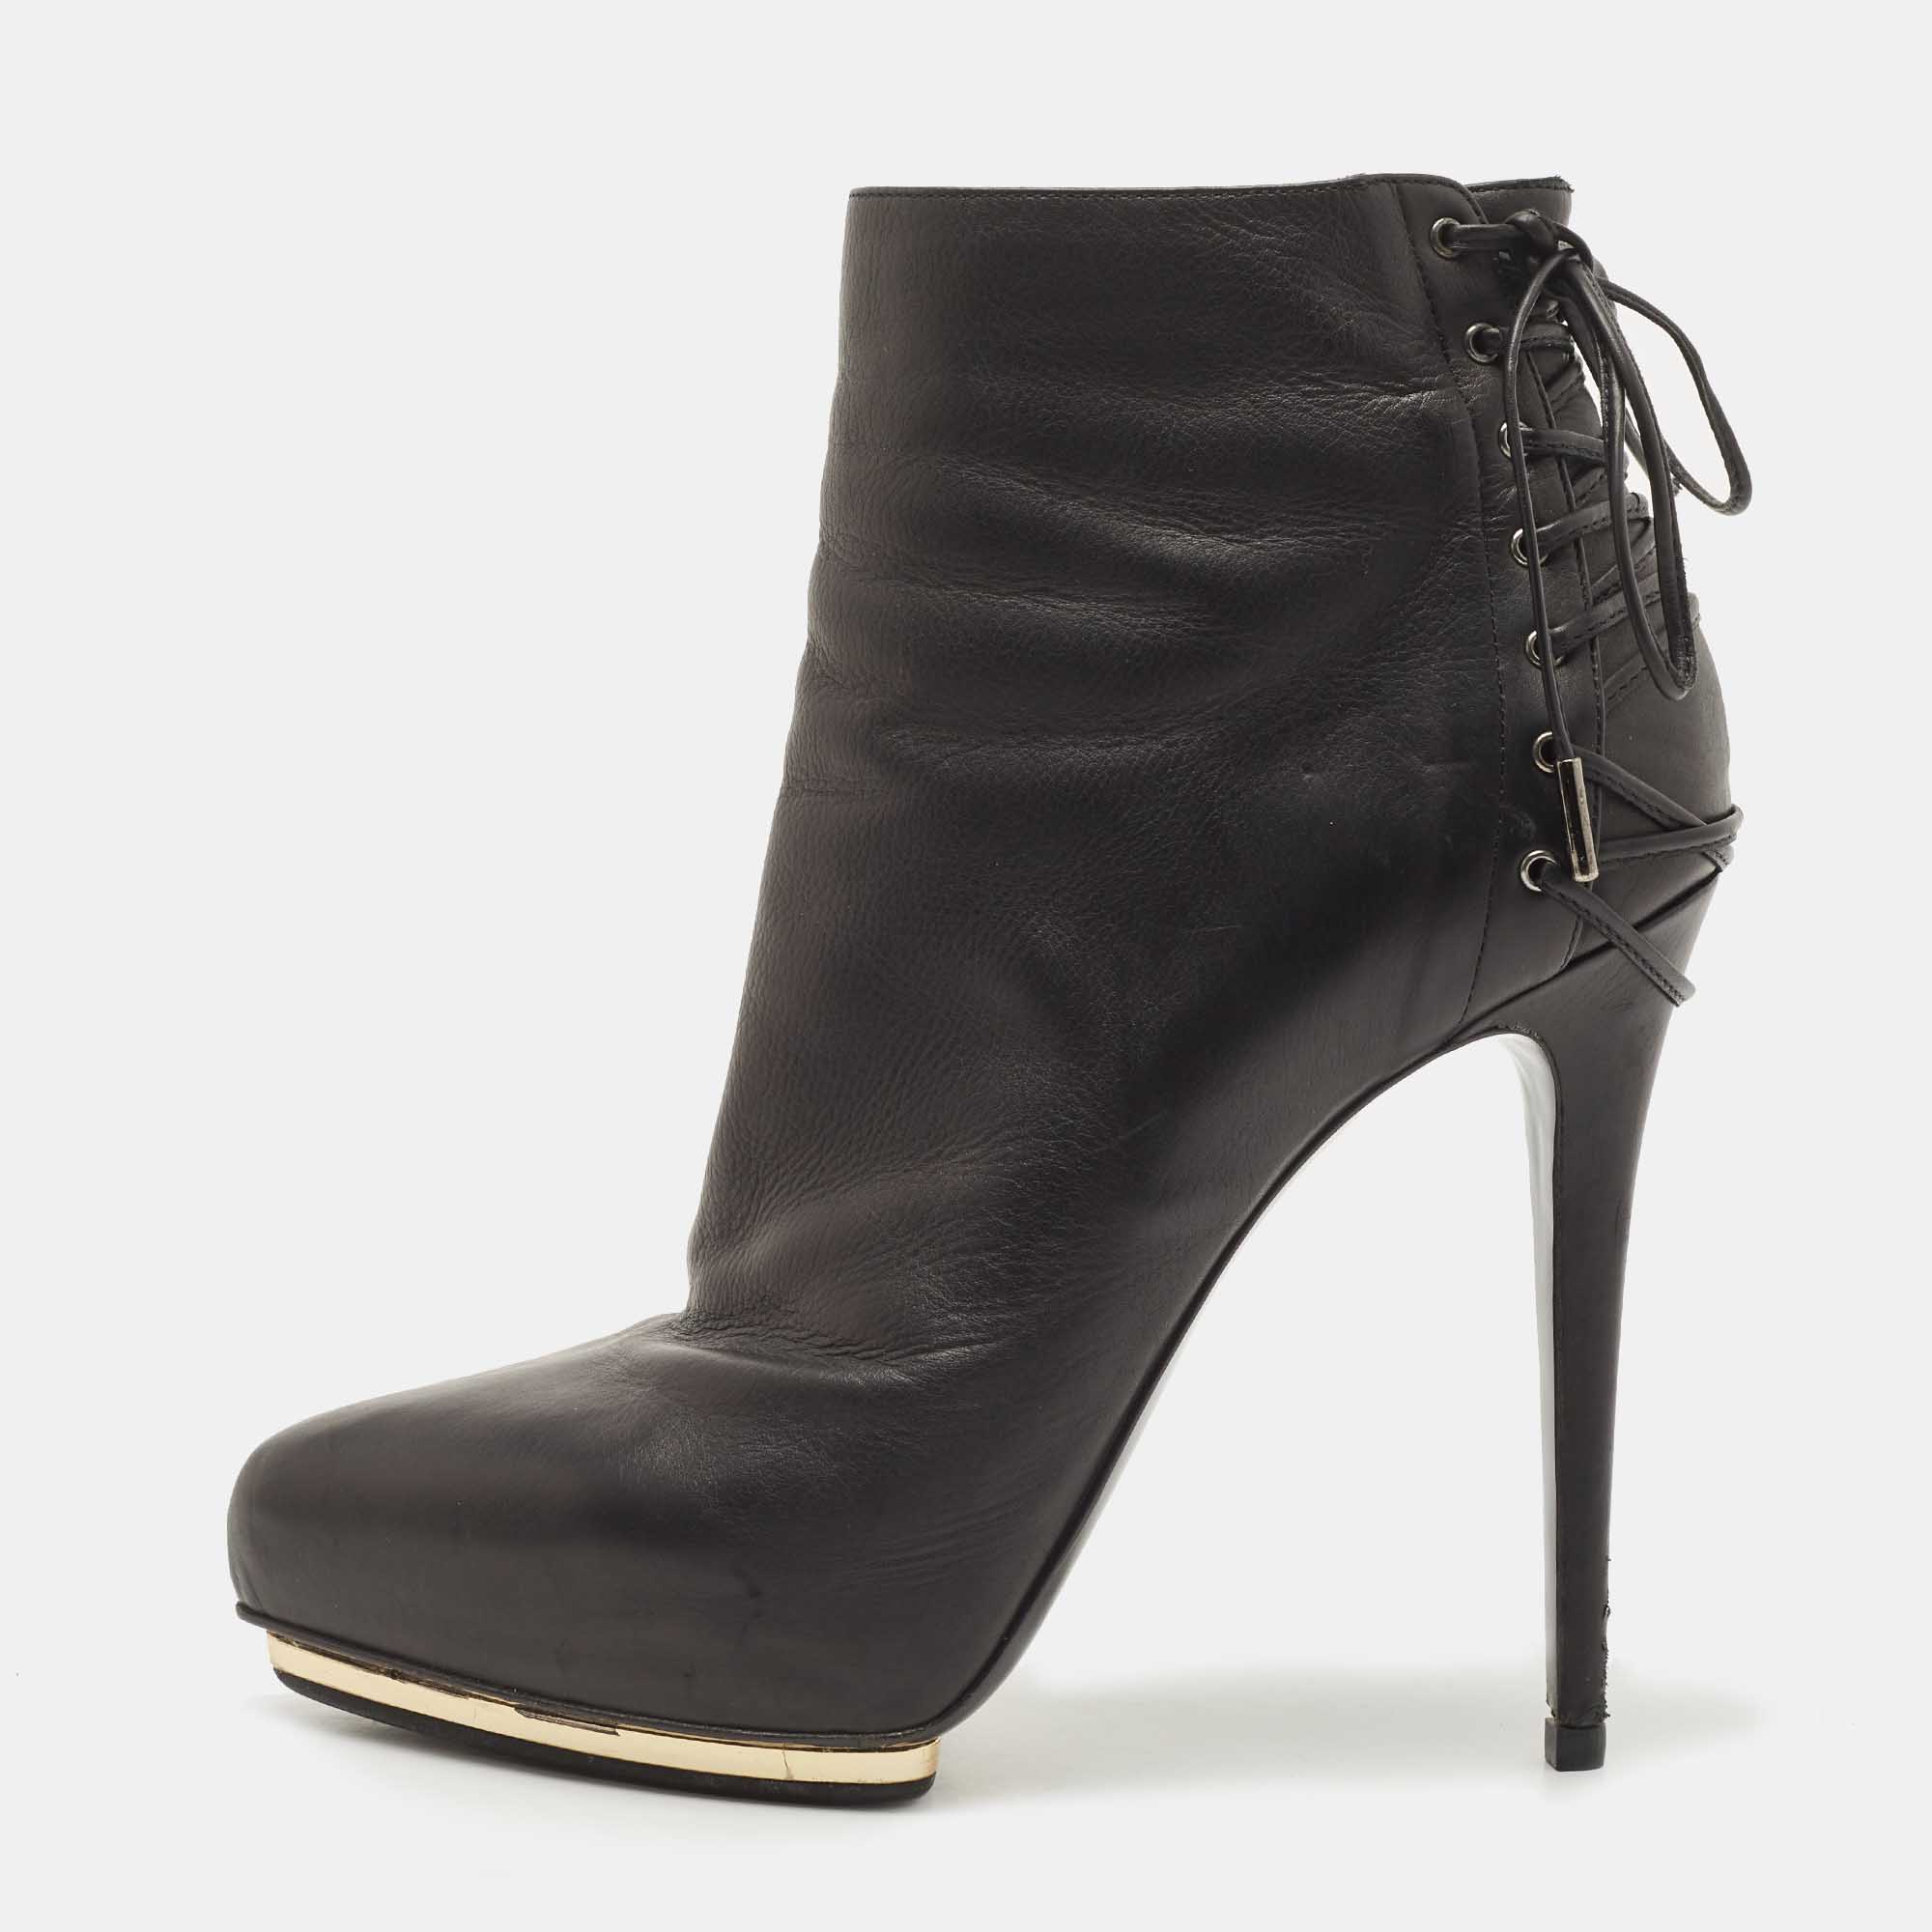 Le Silla Black Leather Ankle Boots Size 39